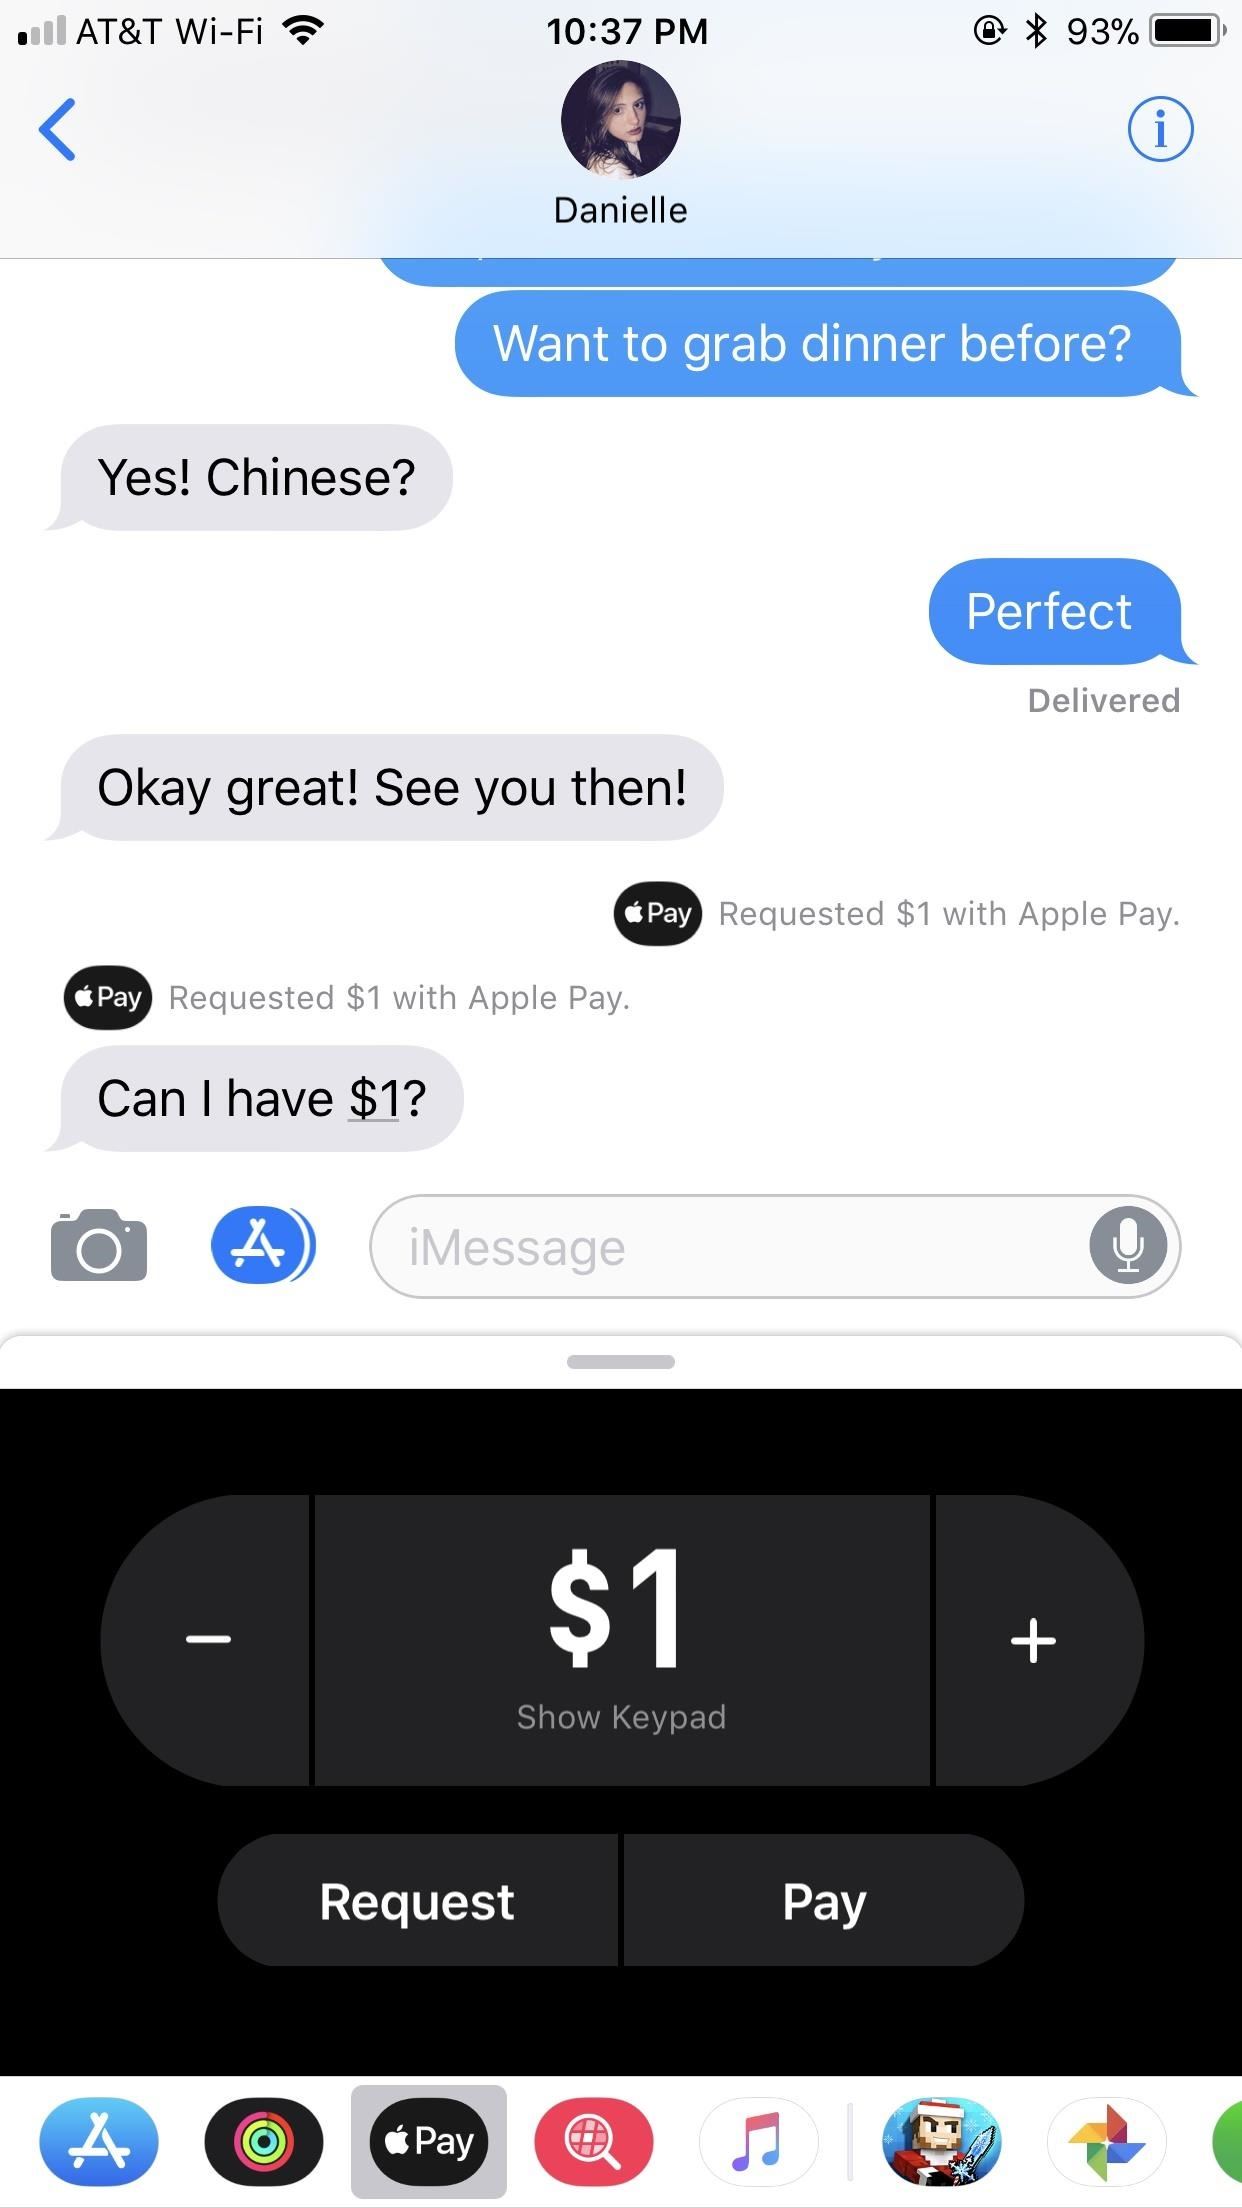 Apple Pay Cash 101: How to Make Person-to-Person Payments via iMessage